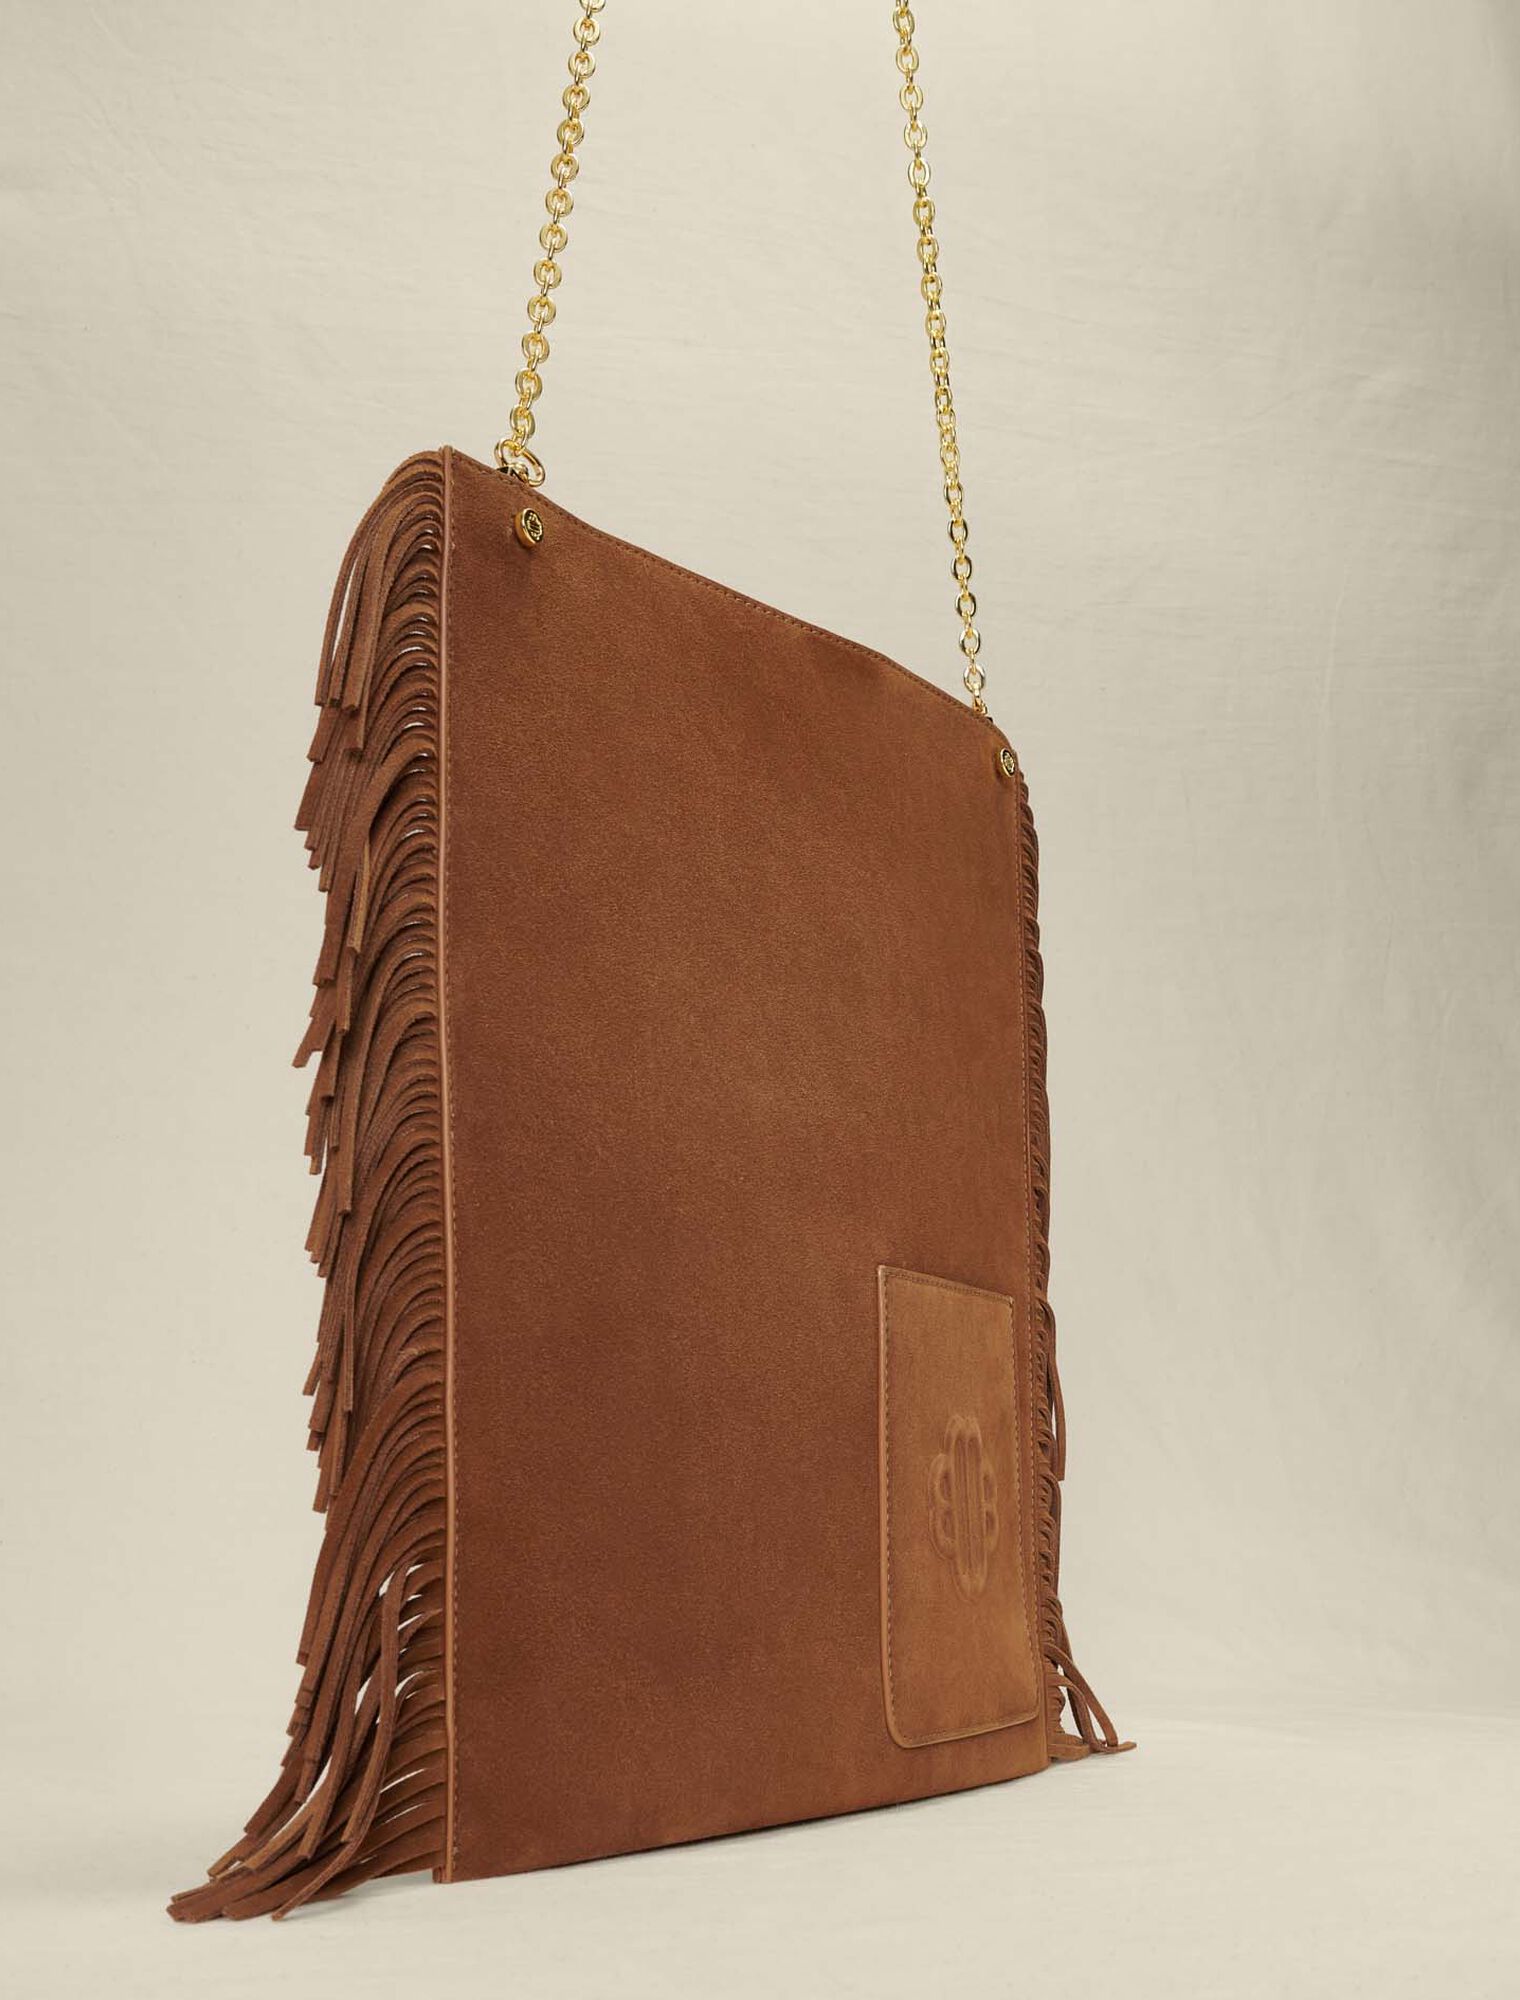 Suede tote bag with fringing